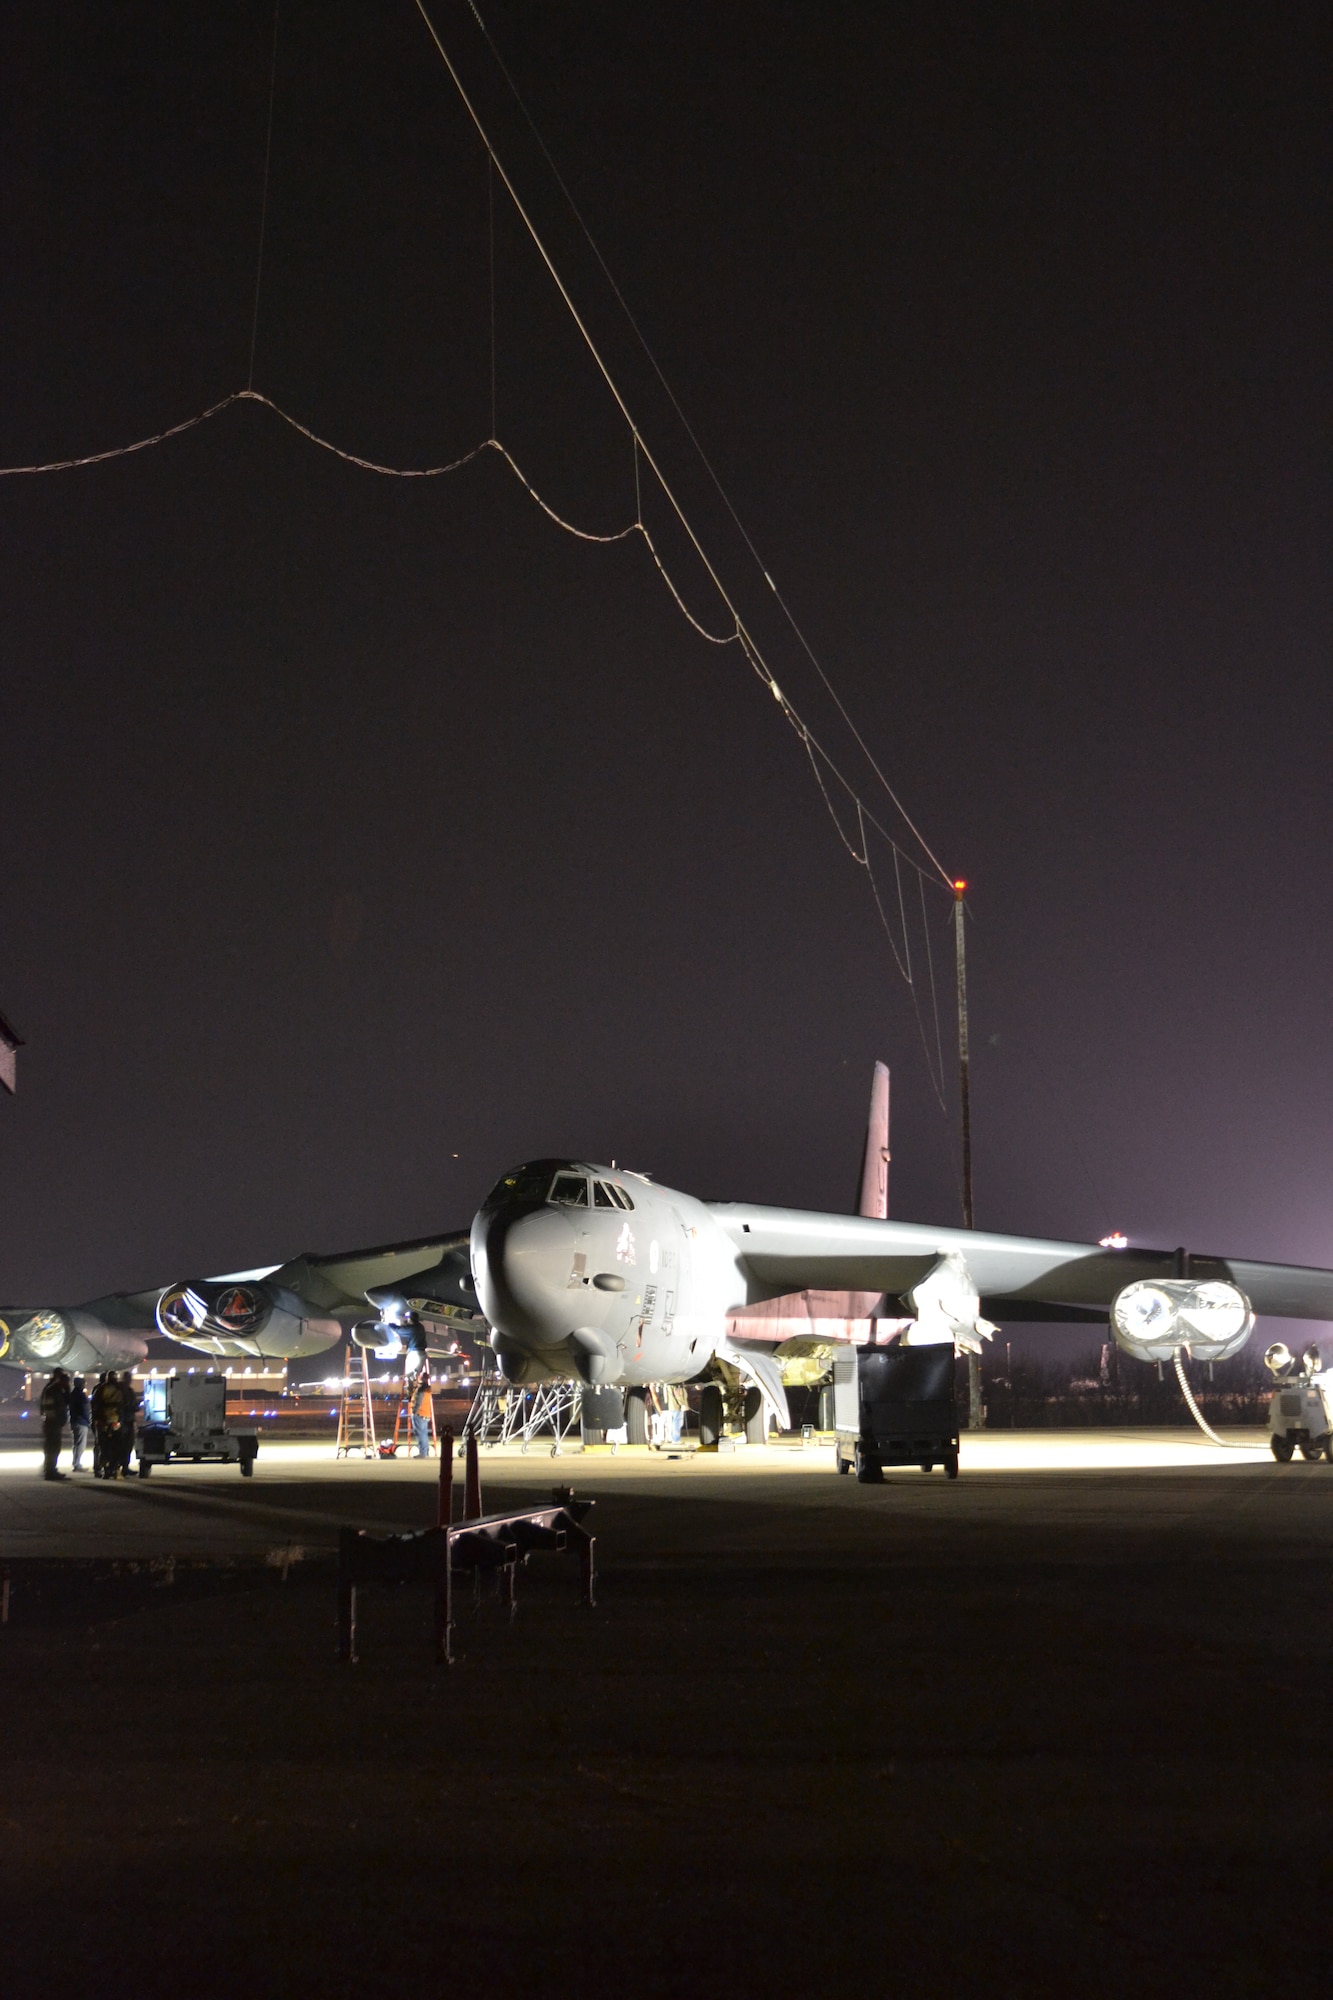 A B-52H Stratofortress bomber from the 2nd Bomb Wing, Barksdale AFB, Louisiana underwent electromagnetic pulse hardness testing at Tinker's Compass Rose Testing Facility earlier this year.  (U.S. Air Force photo/Kelly White)